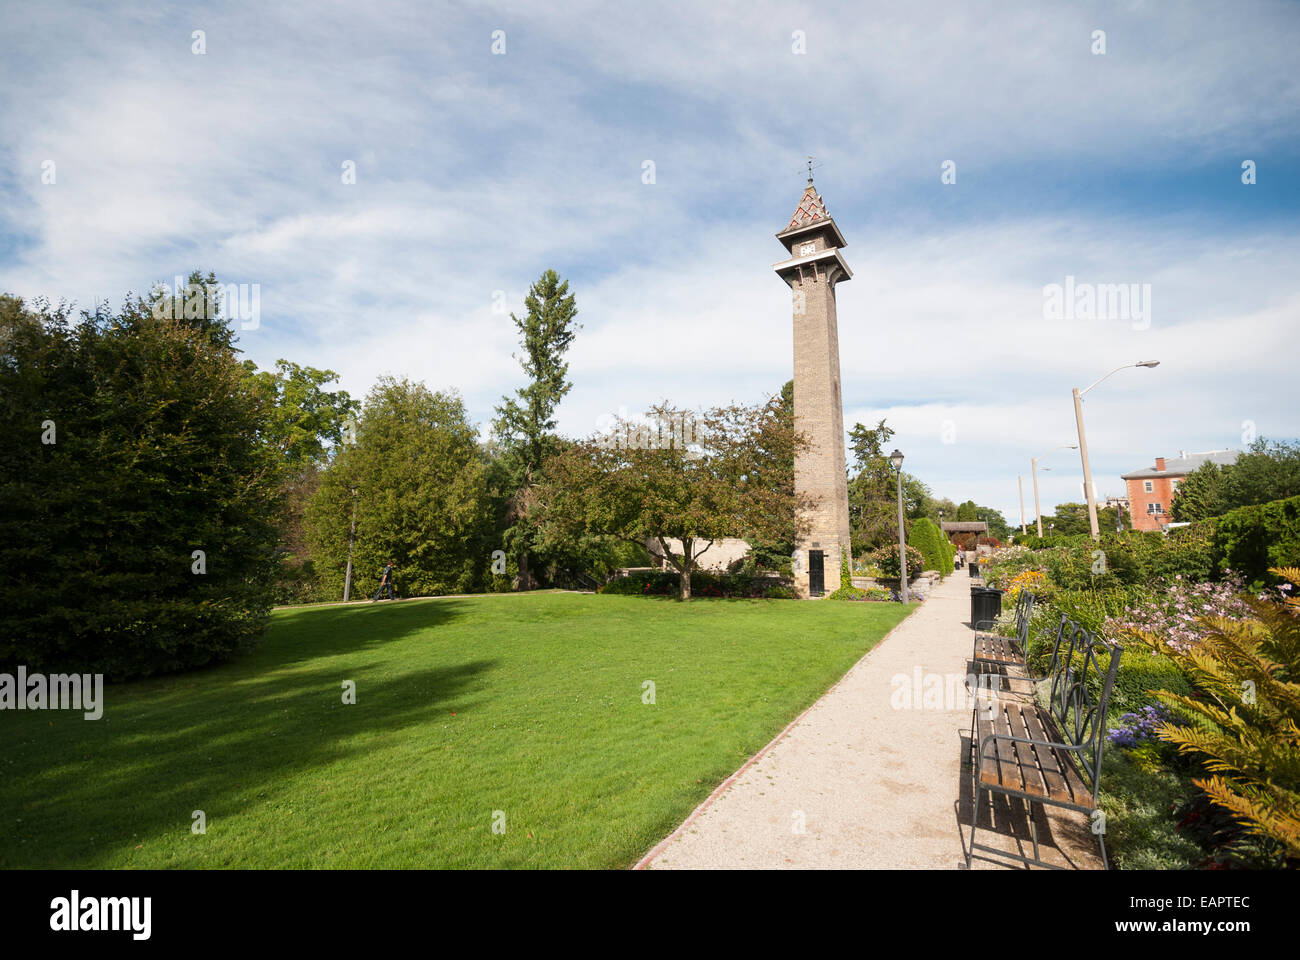 A tower still remains at the Shakespearean gardens formerly the site of an old woolen mill in Stratford Ontario Canada Stock Photo